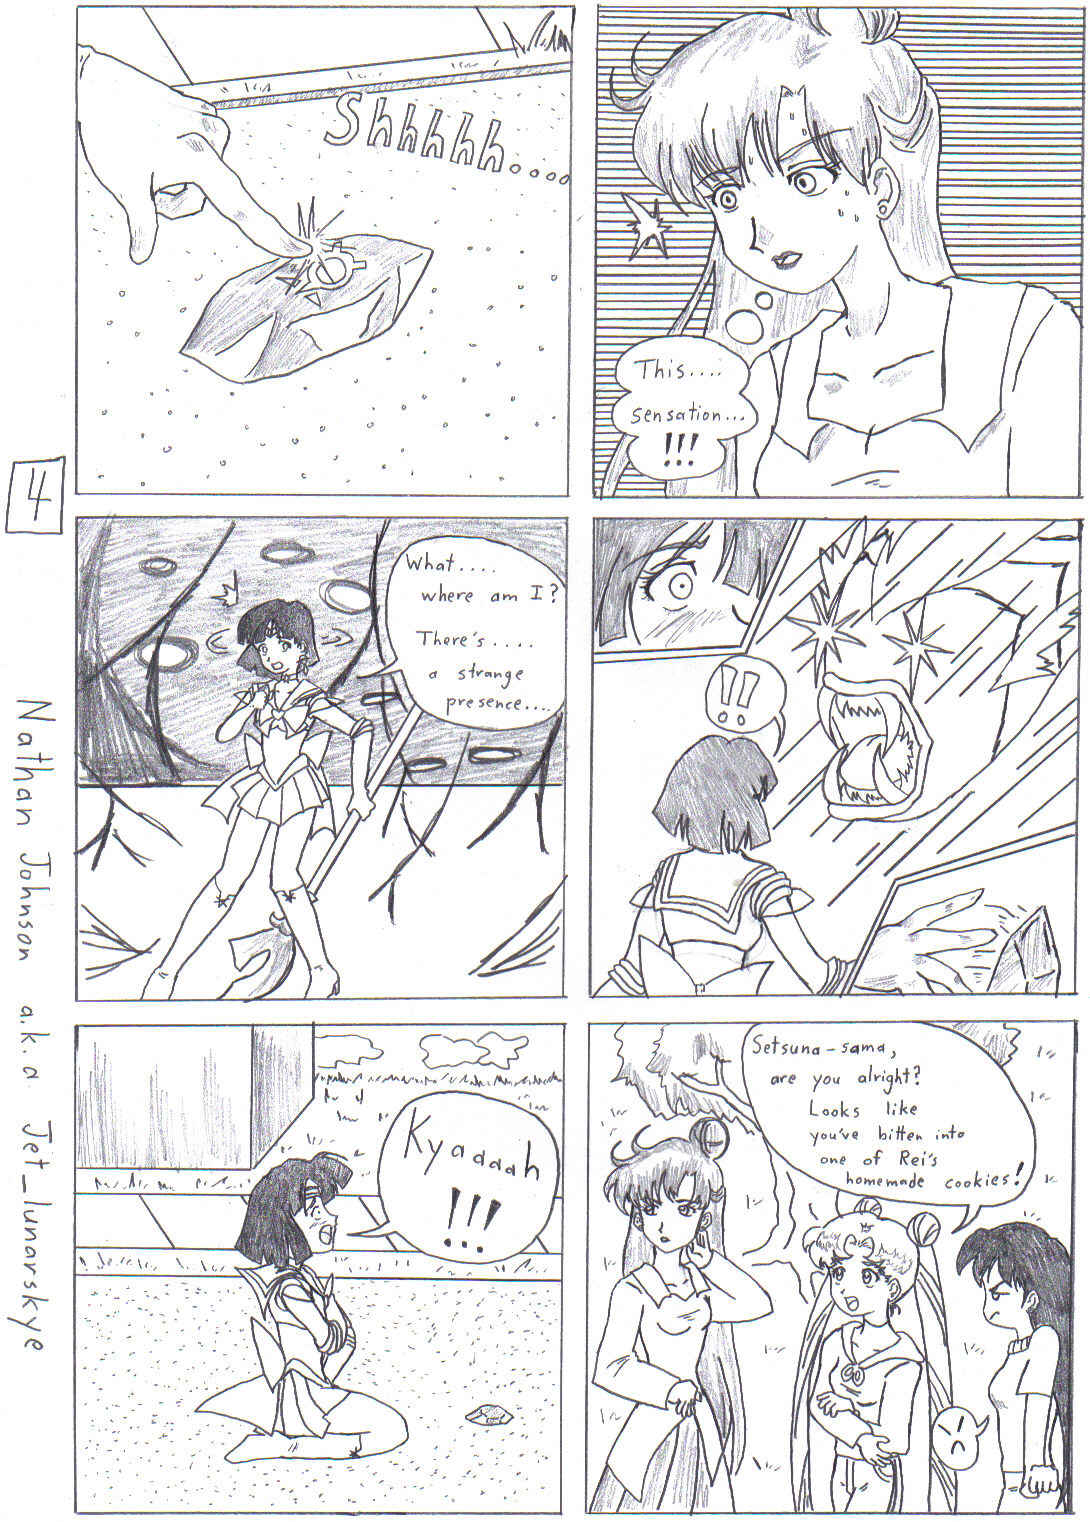 Sailor Moon Stars: The Nighmare Soldier page 4 by Jet_lunarskye